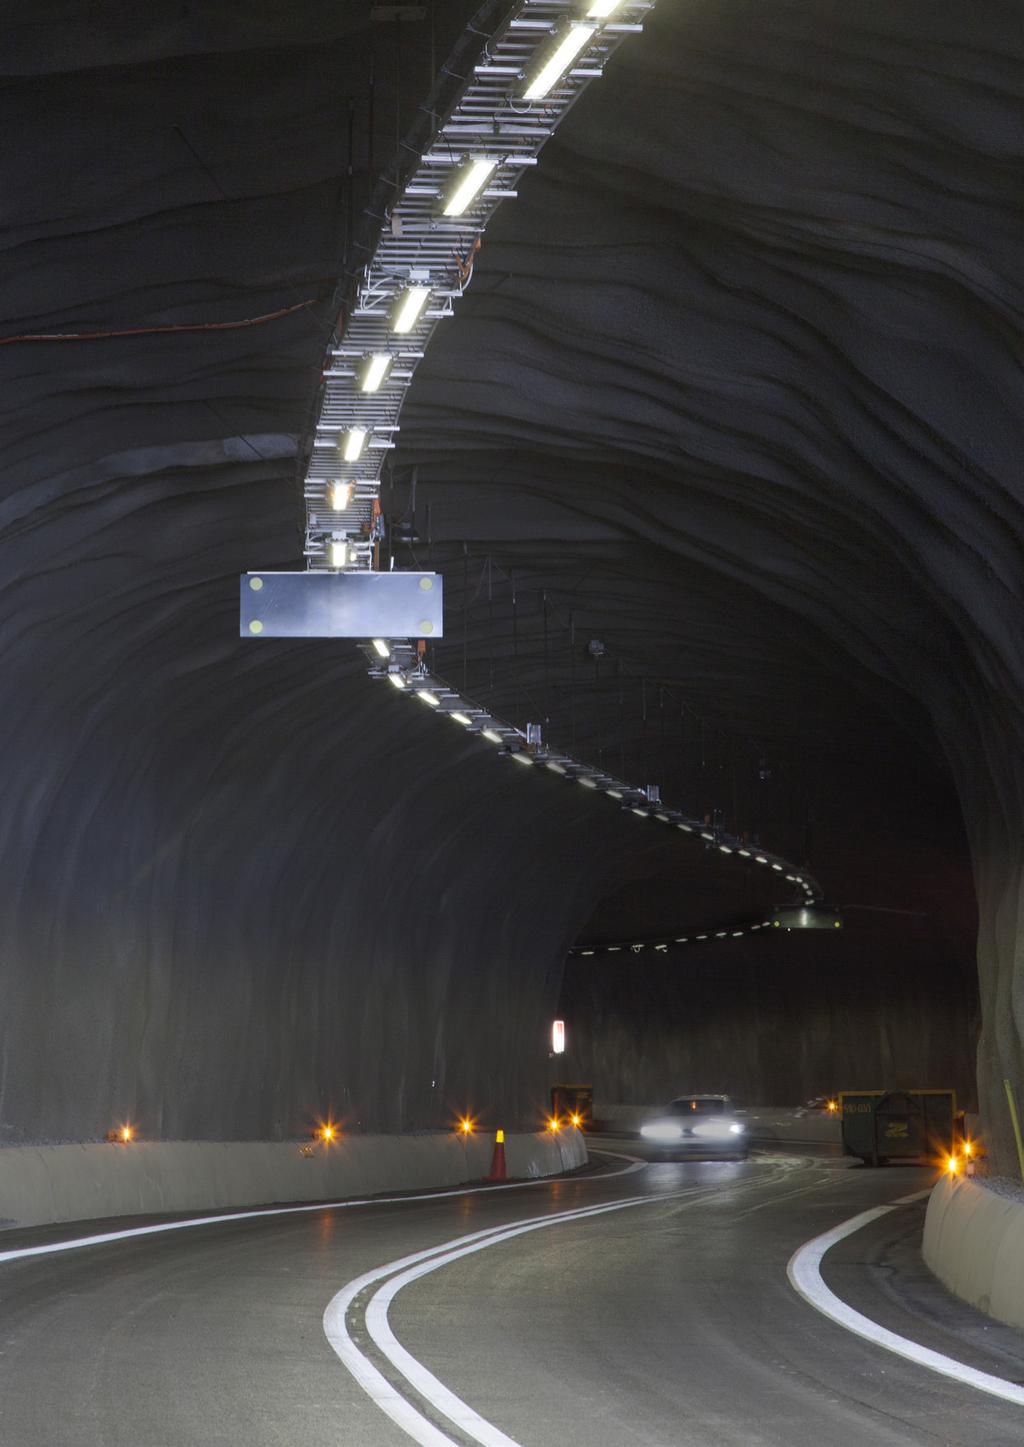 Up to 70% Energy savings With road traffic volumes becoming heavier, tunnels and underpasses are playing an increasingly important role in maintaining a smooth and safe flow of traffic.